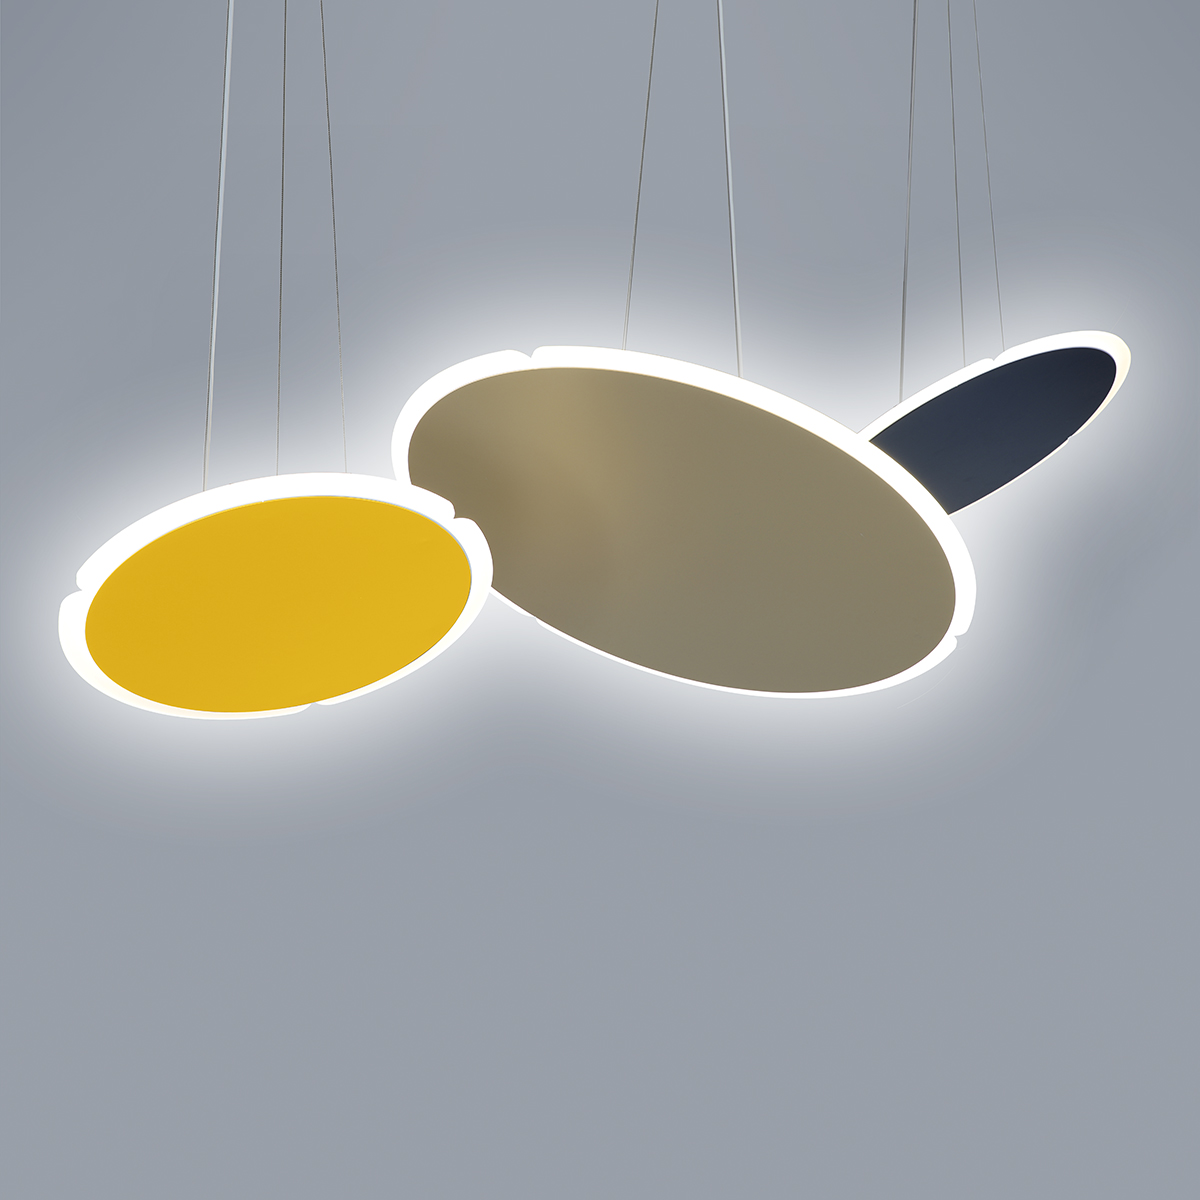 Three sizes and colors of Sail light fixture from Visa Lighting